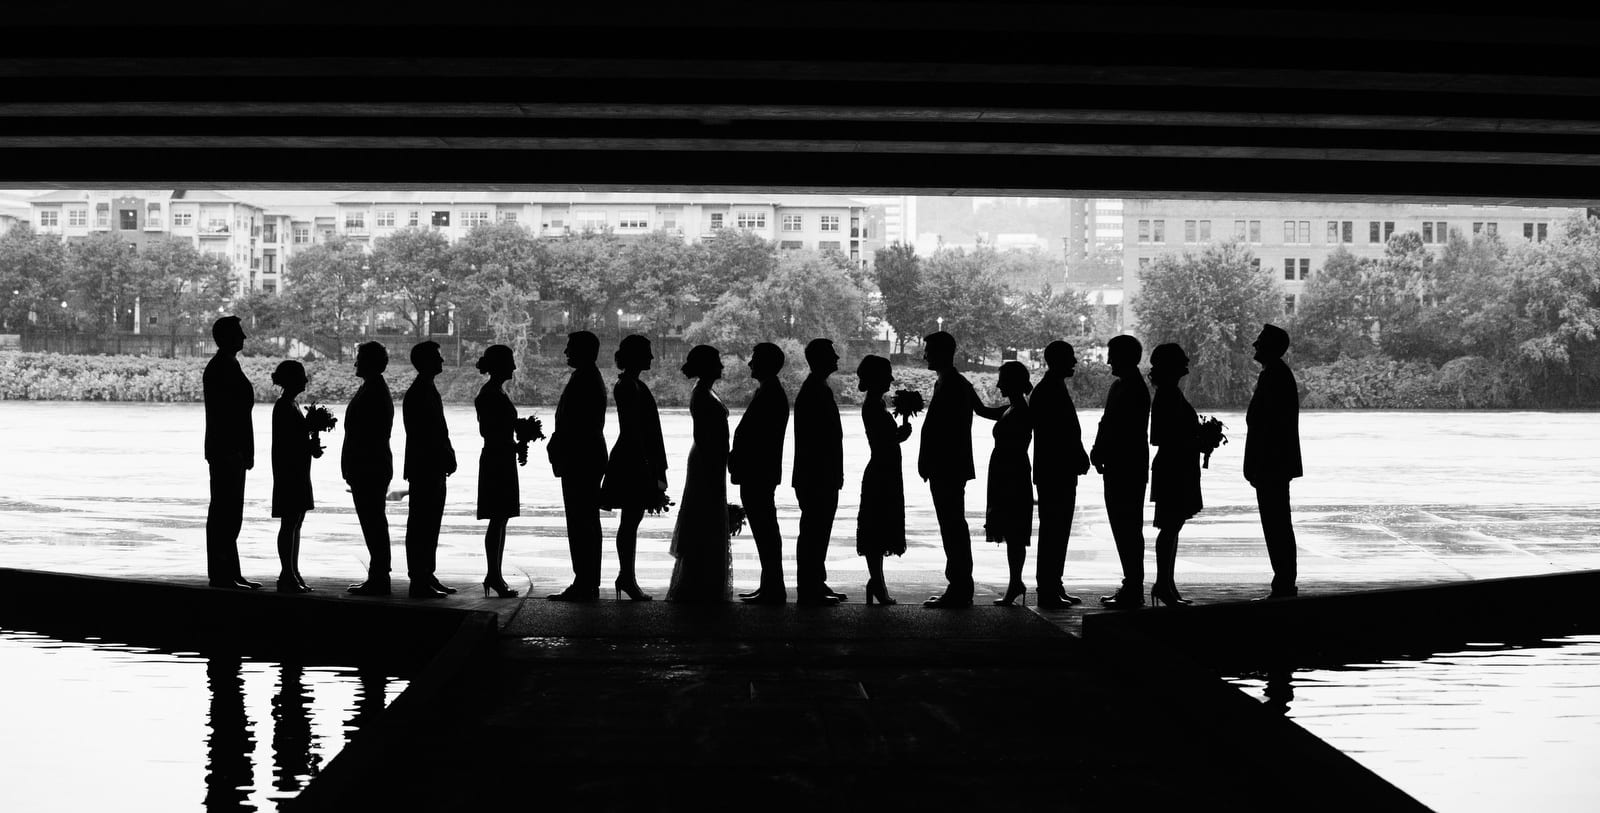 A bridal party stands in silhouette at the bottom of the pedestrian walkway beneath the David L. Lawrence Convention Center in Pittsburgh.